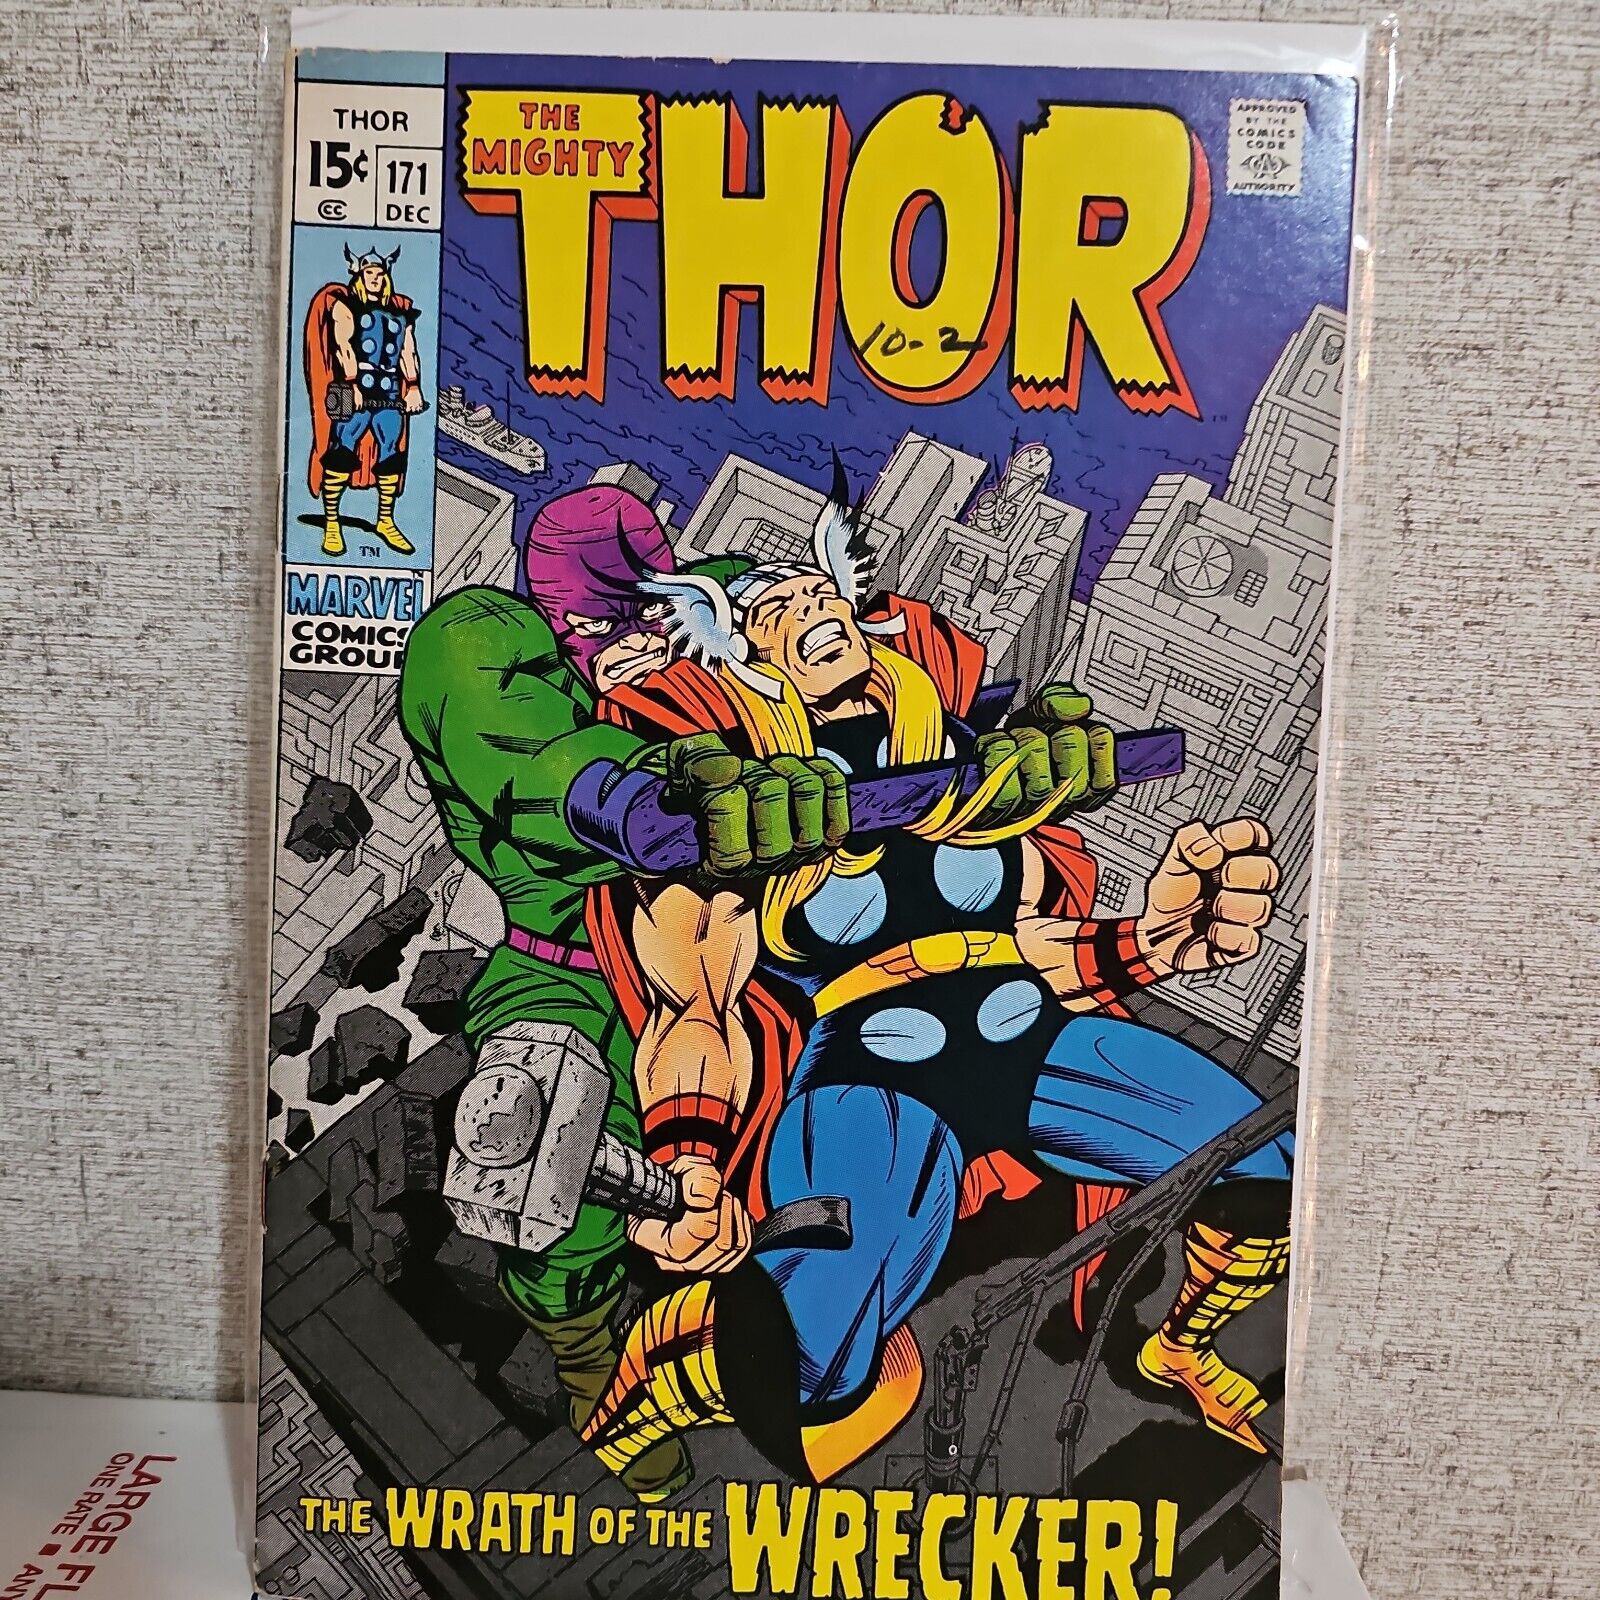 THOR #171 VF 8.0- 8.5 EARLY WRECKER APPEARANCE LAST SILVER AGE JACK KIRBY 